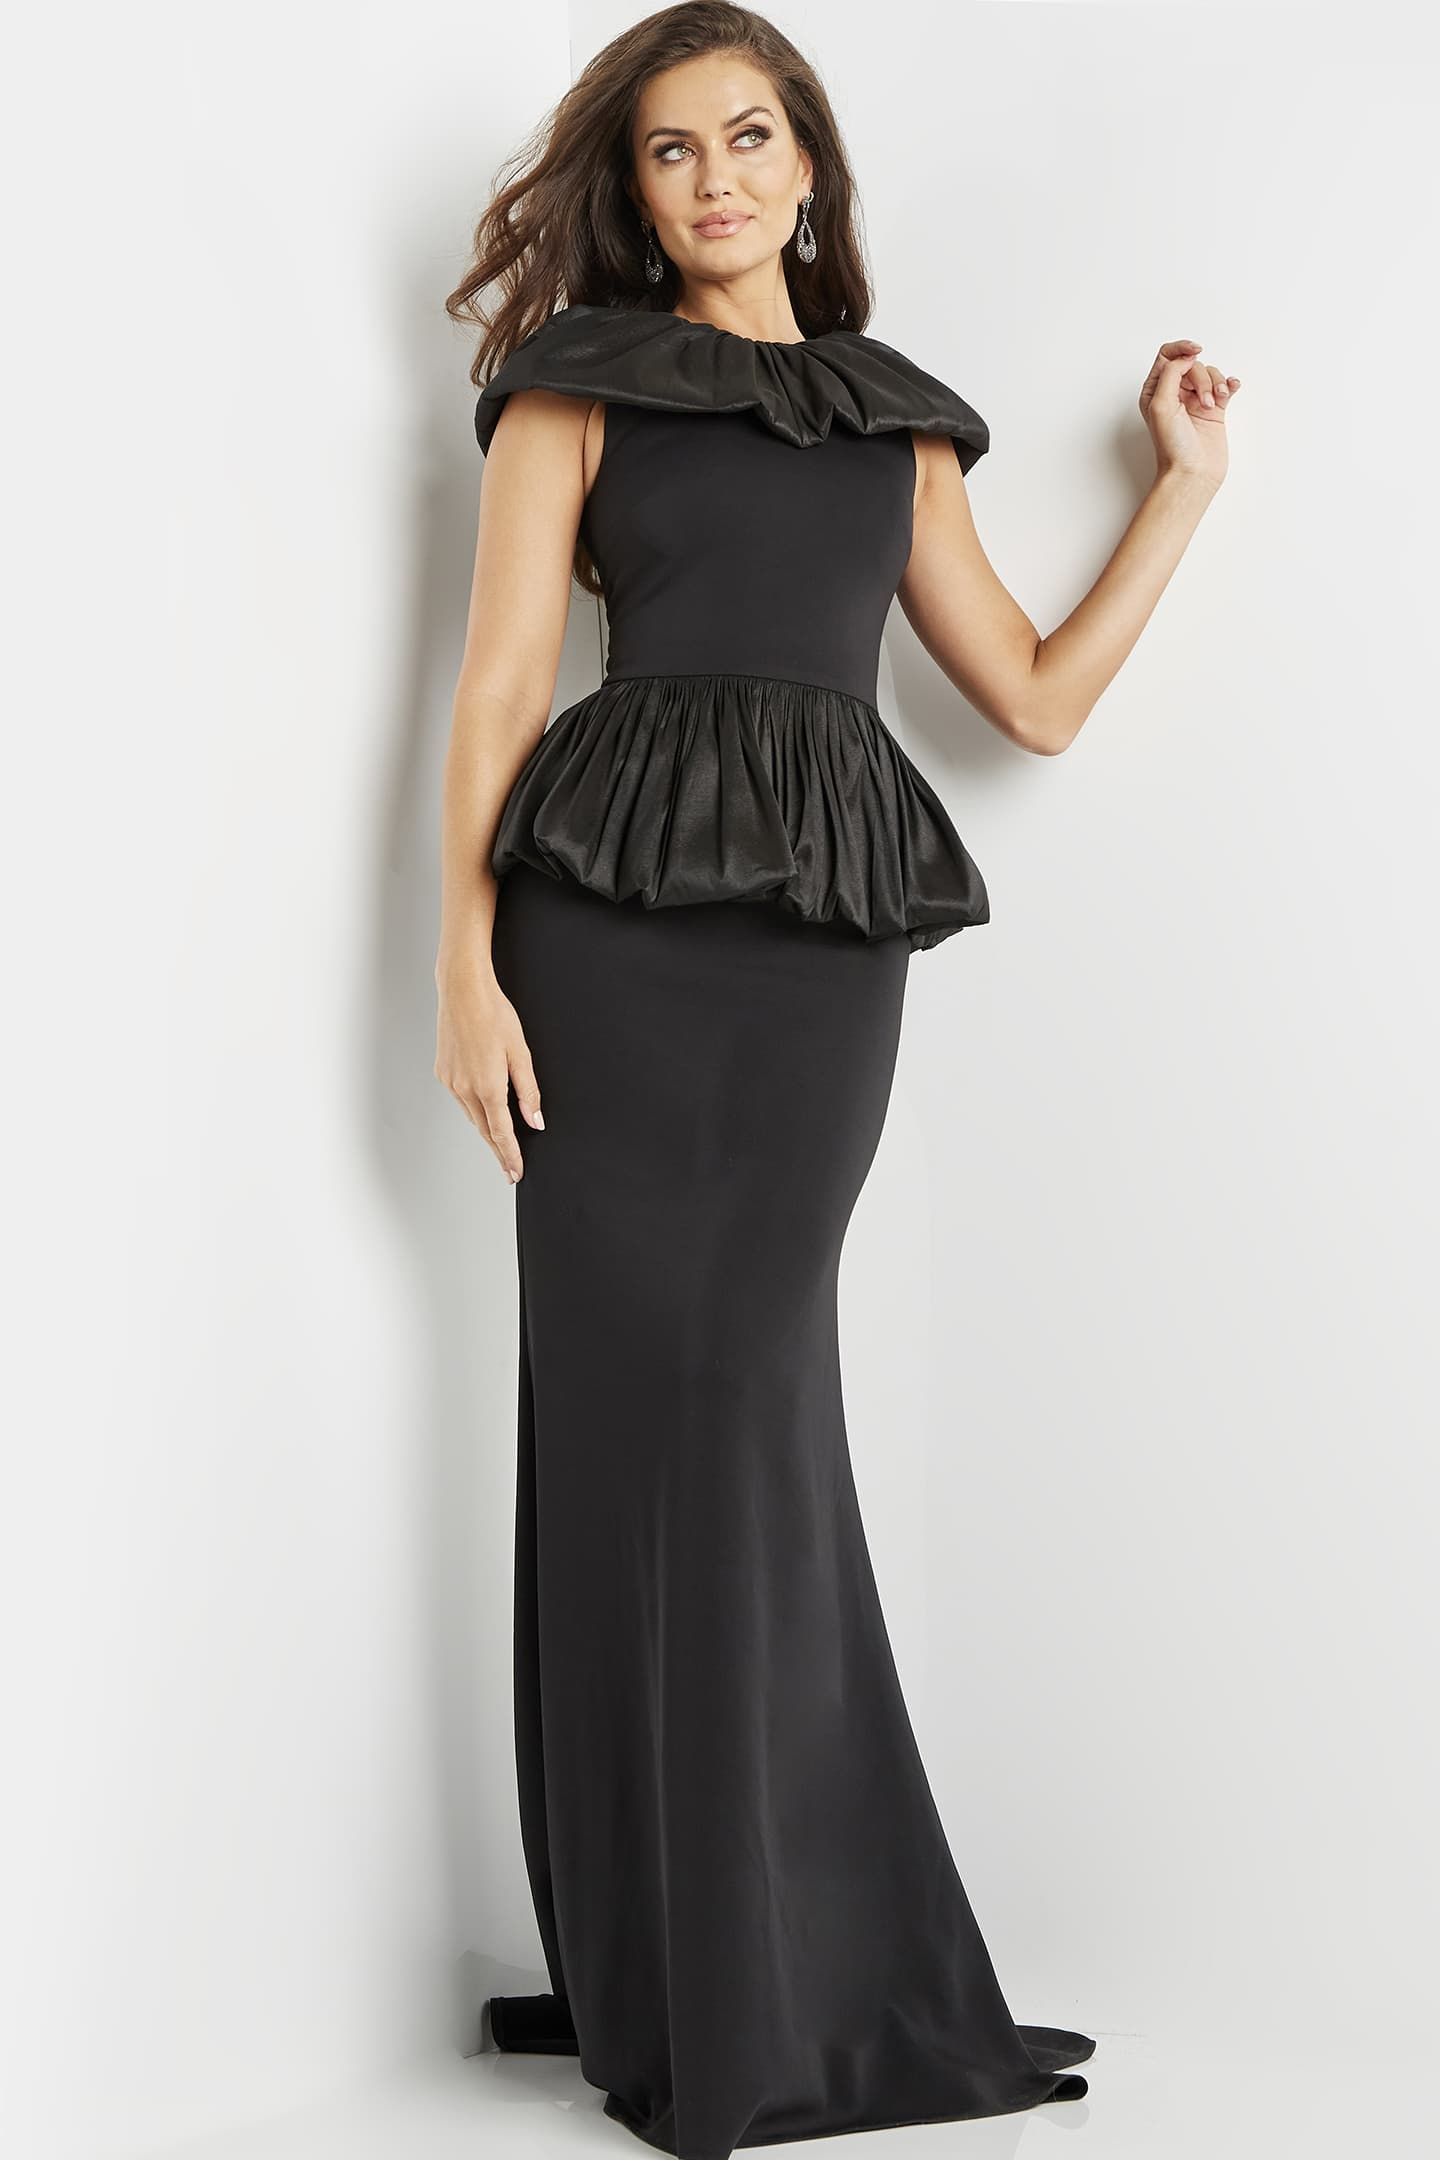 Sequined Black Lace Mermaid Homecoming Dress 2022 With High Neck, Peplum  Detailing, Long Sleeves, And Sweep Train Plus Size Satin Evening Gown From  Weddingteam, $121.77 | DHgate.Com